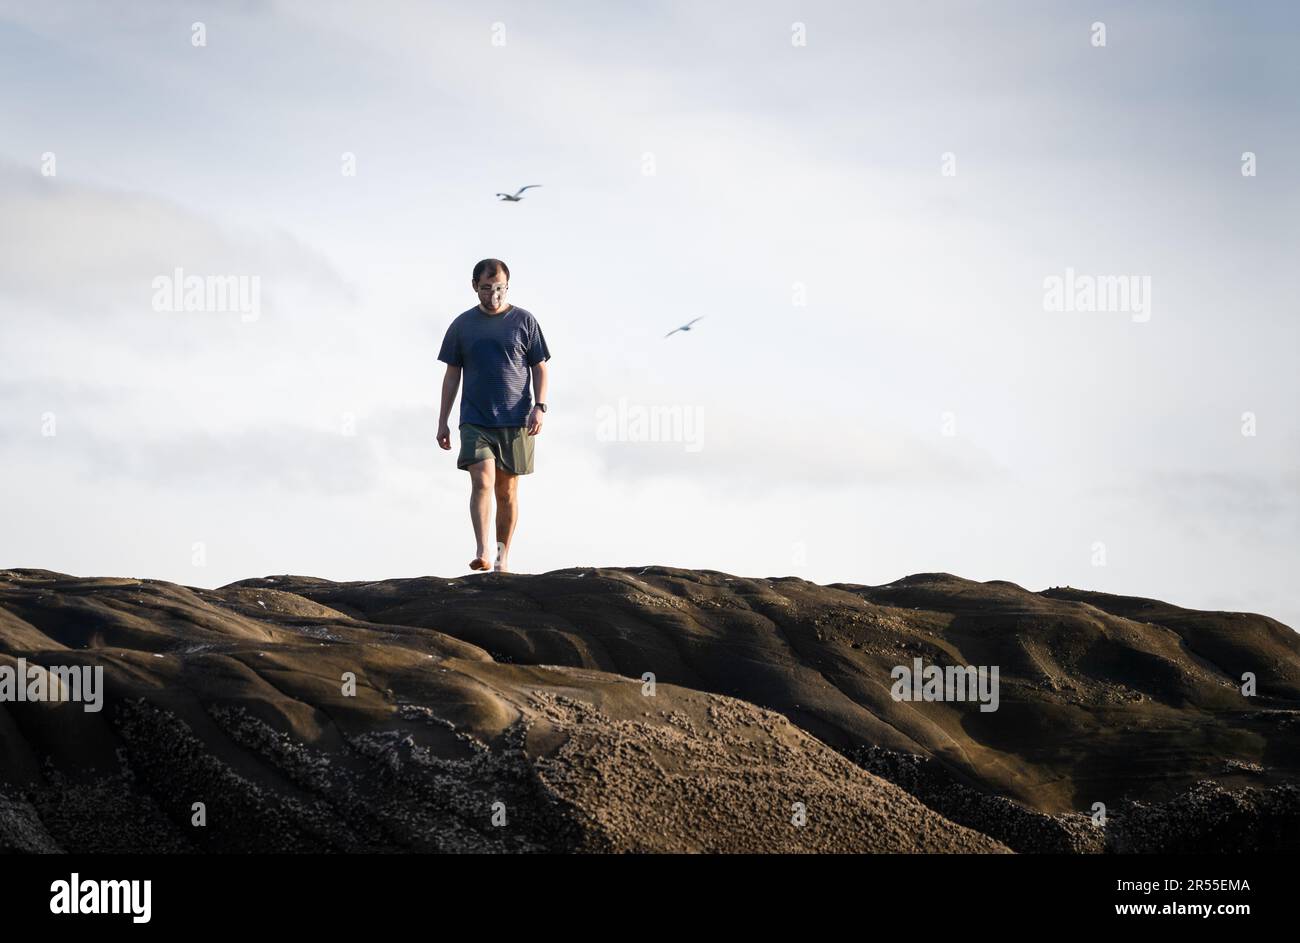 Man walking barefoot on rocks at Muriwai beach with gannets flying overhead. Auckland. Stock Photo